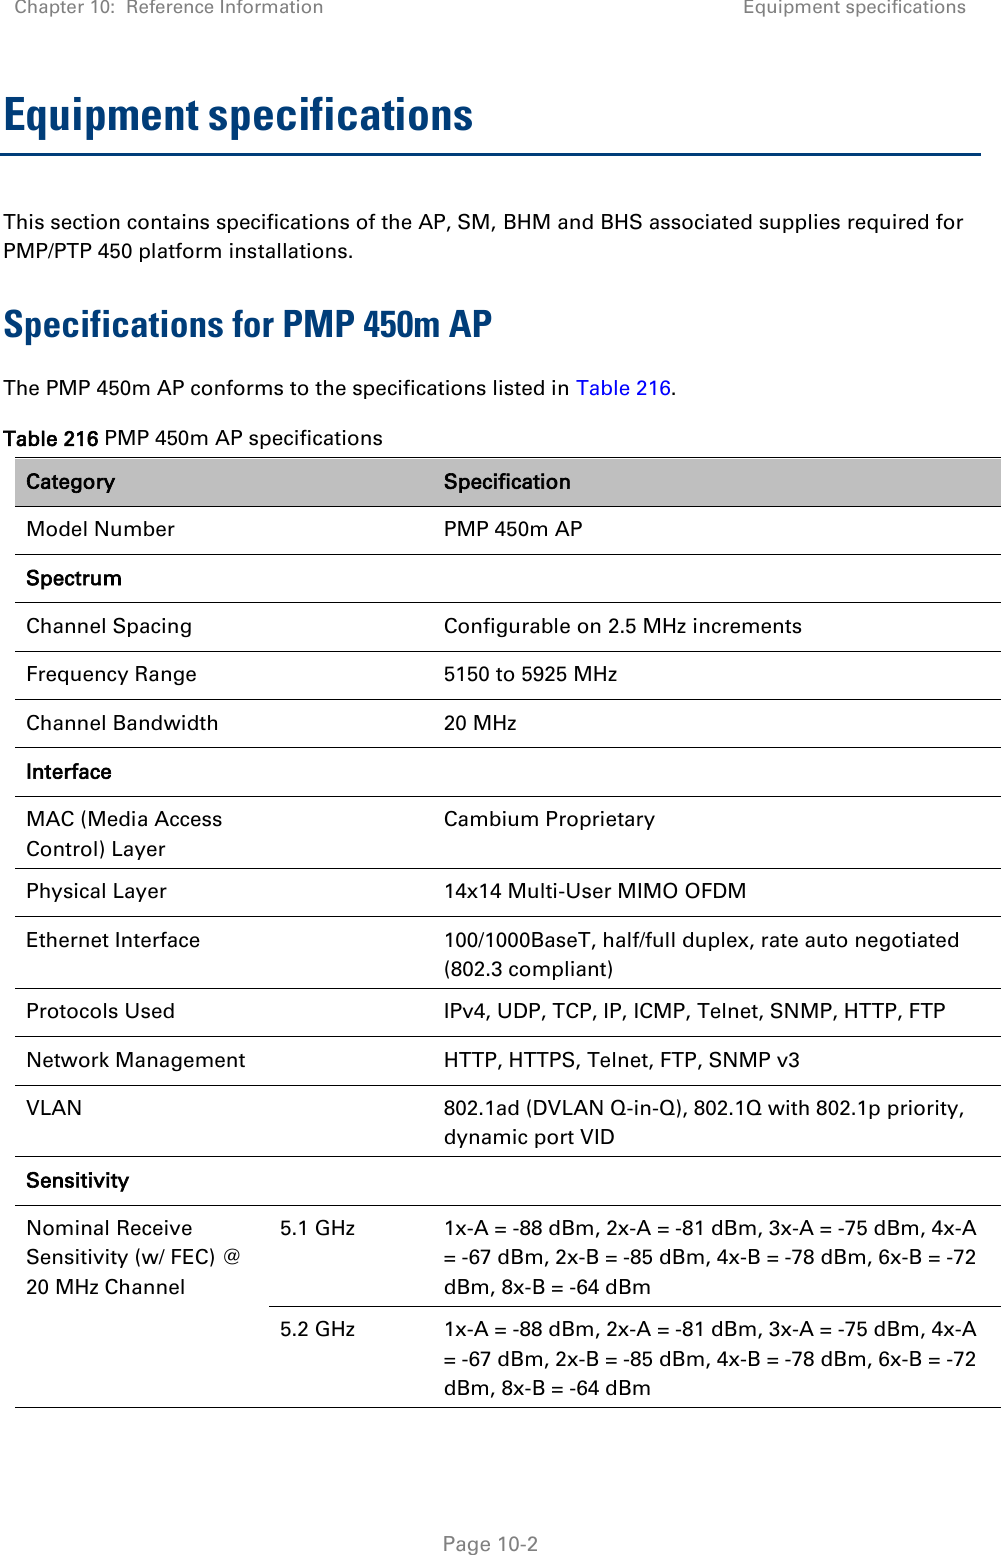 Chapter 10:  Reference Information Equipment specifications   Page 10-2 Equipment specifications This section contains specifications of the AP, SM, BHM and BHS associated supplies required for PMP/PTP 450 platform installations. Specifications for PMP 450m AP The PMP 450m AP conforms to the specifications listed in Table 216. Table 216 PMP 450m AP specifications Category  Specification Model Number  PMP 450m AP Spectrum   Channel Spacing  Configurable on 2.5 MHz increments Frequency Range  5150 to 5925 MHz Channel Bandwidth  20 MHz Interface   MAC (Media Access Control) Layer  Cambium Proprietary Physical Layer  14x14 Multi-User MIMO OFDM Ethernet Interface  100/1000BaseT, half/full duplex, rate auto negotiated (802.3 compliant) Protocols Used  IPv4, UDP, TCP, IP, ICMP, Telnet, SNMP, HTTP, FTP Network Management  HTTP, HTTPS, Telnet, FTP, SNMP v3 VLAN  802.1ad (DVLAN Q-in-Q), 802.1Q with 802.1p priority, dynamic port VID Sensitivity    Nominal Receive Sensitivity (w/ FEC) @ 20 MHz Channel 5.1 GHz 1x-A = -88 dBm, 2x-A = -81 dBm, 3x-A = -75 dBm, 4x-A = -67 dBm, 2x-B = -85 dBm, 4x-B = -78 dBm, 6x-B = -72 dBm, 8x-B = -64 dBm 5.2 GHz 1x-A = -88 dBm, 2x-A = -81 dBm, 3x-A = -75 dBm, 4x-A = -67 dBm, 2x-B = -85 dBm, 4x-B = -78 dBm, 6x-B = -72 dBm, 8x-B = -64 dBm 